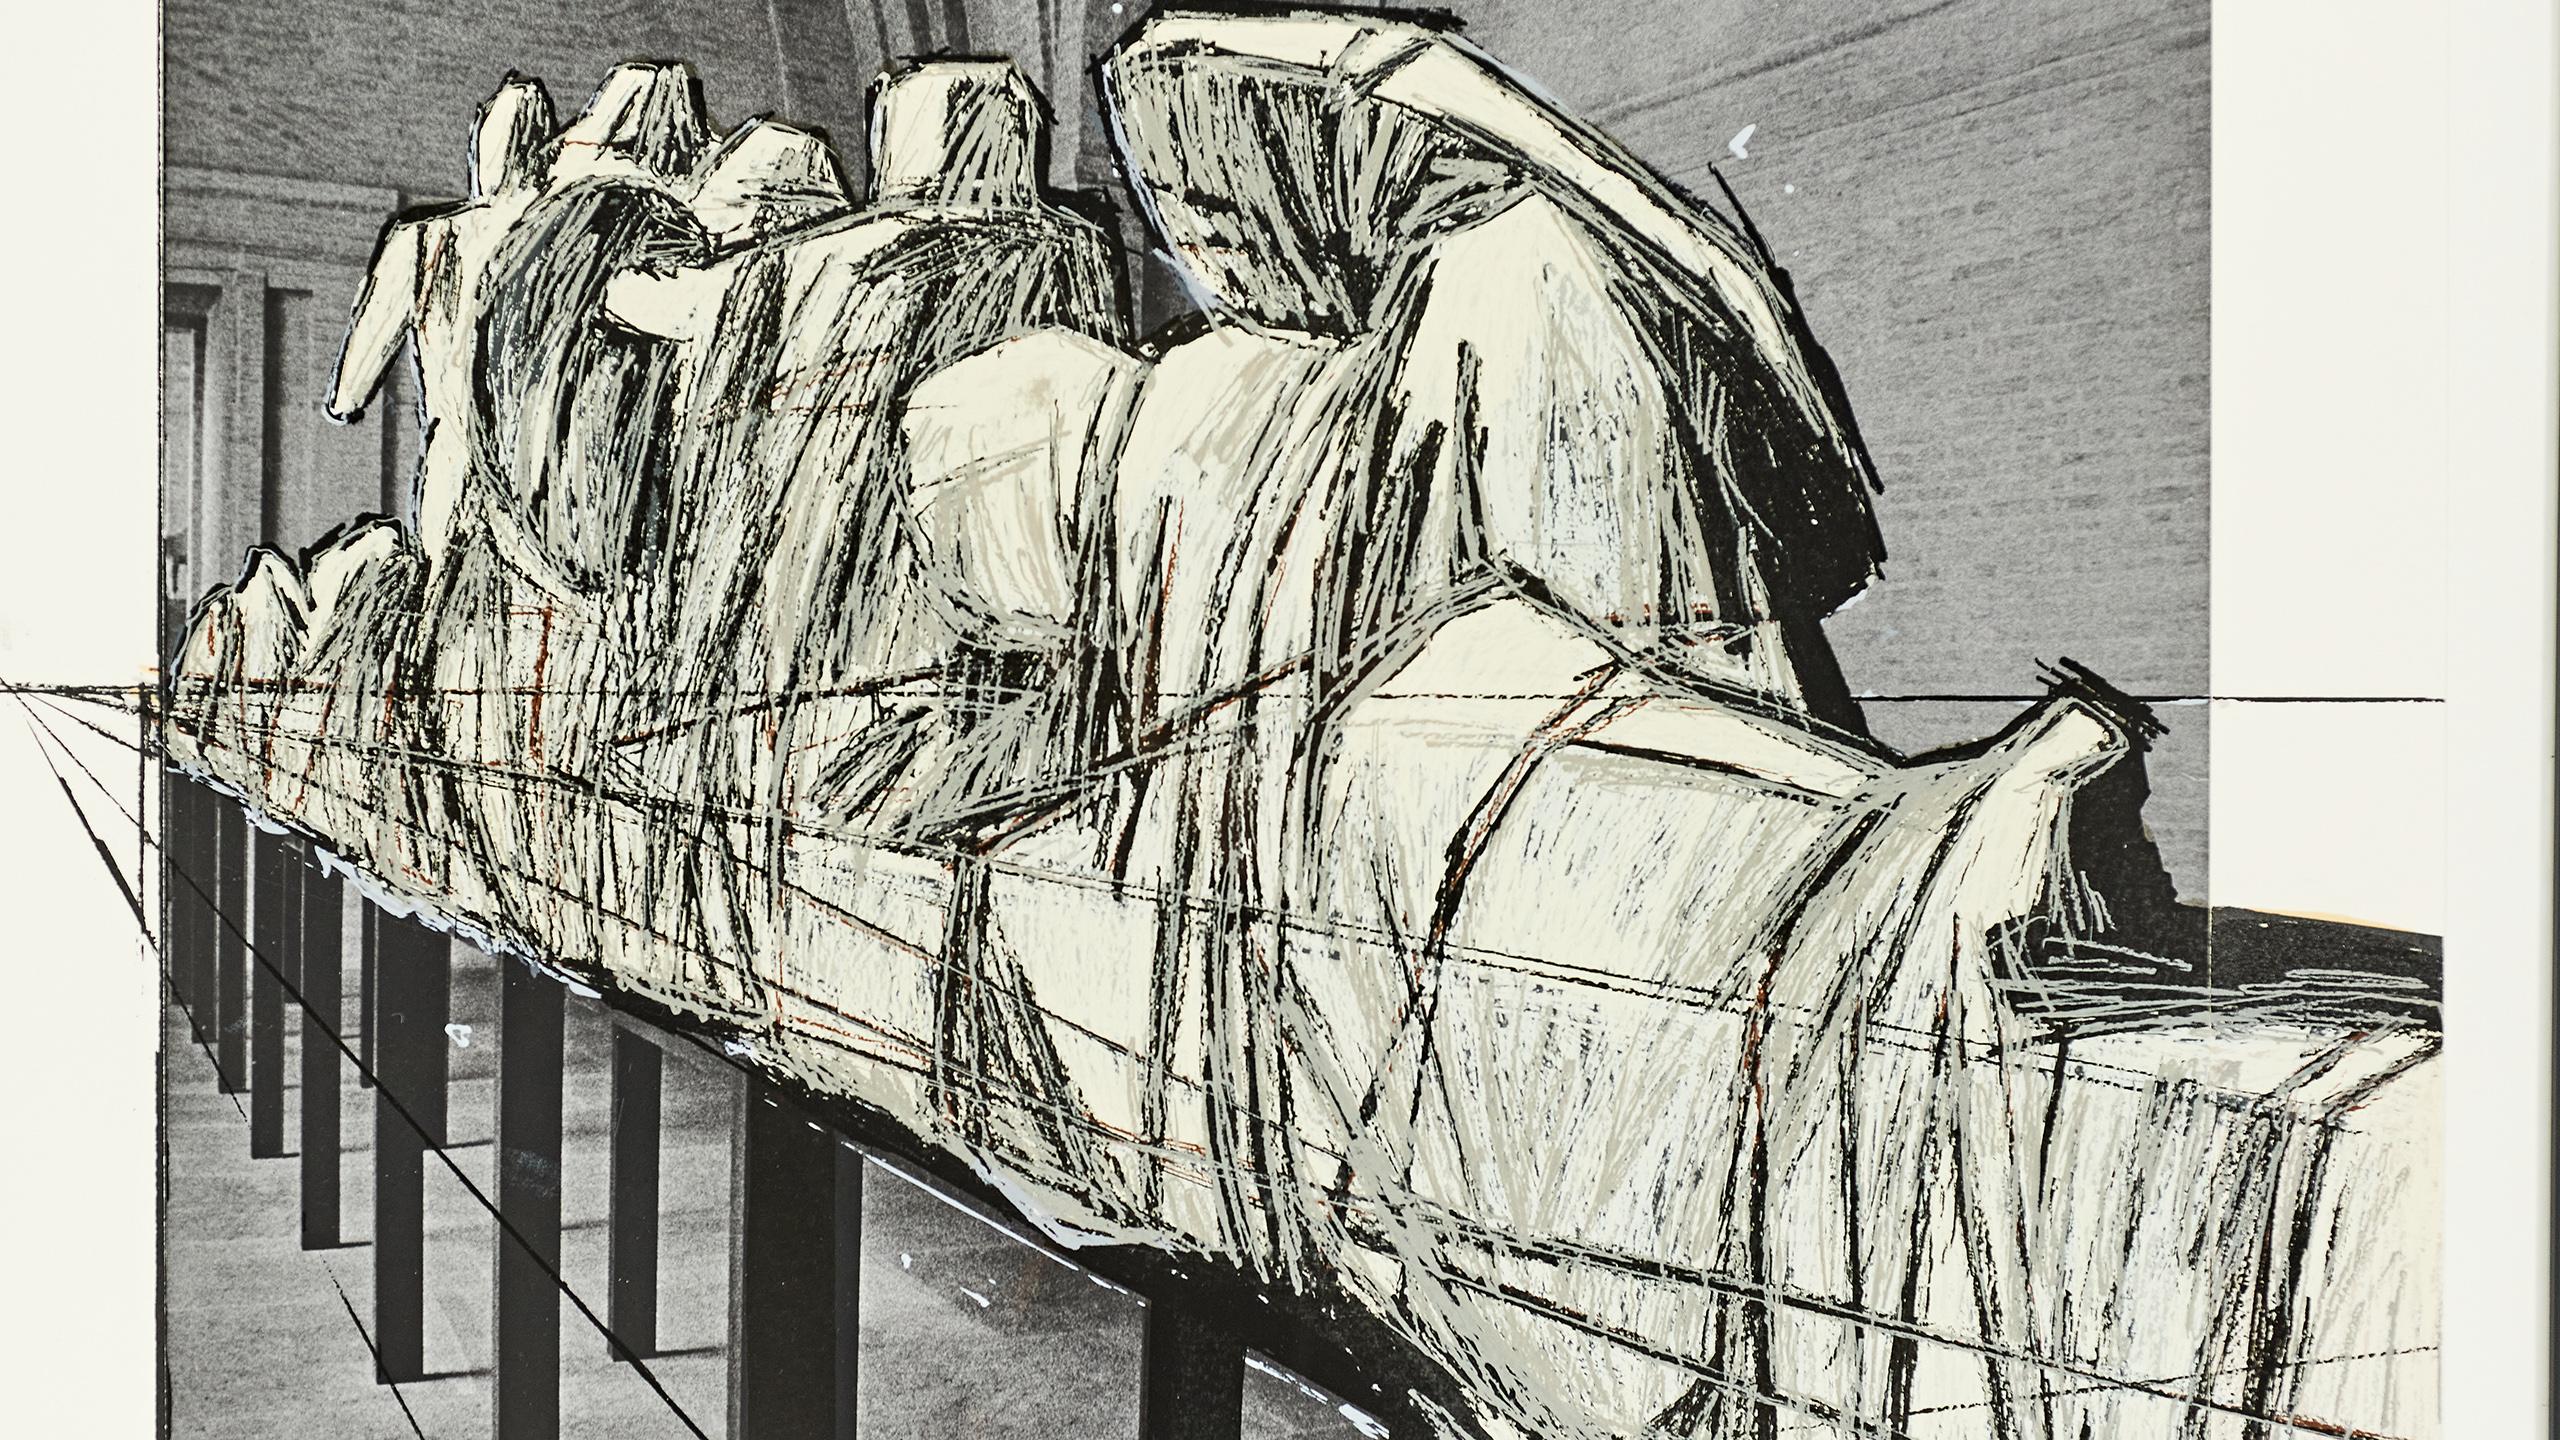 Christo, “Wrapped Statues”, Mixed Media, 1988 2